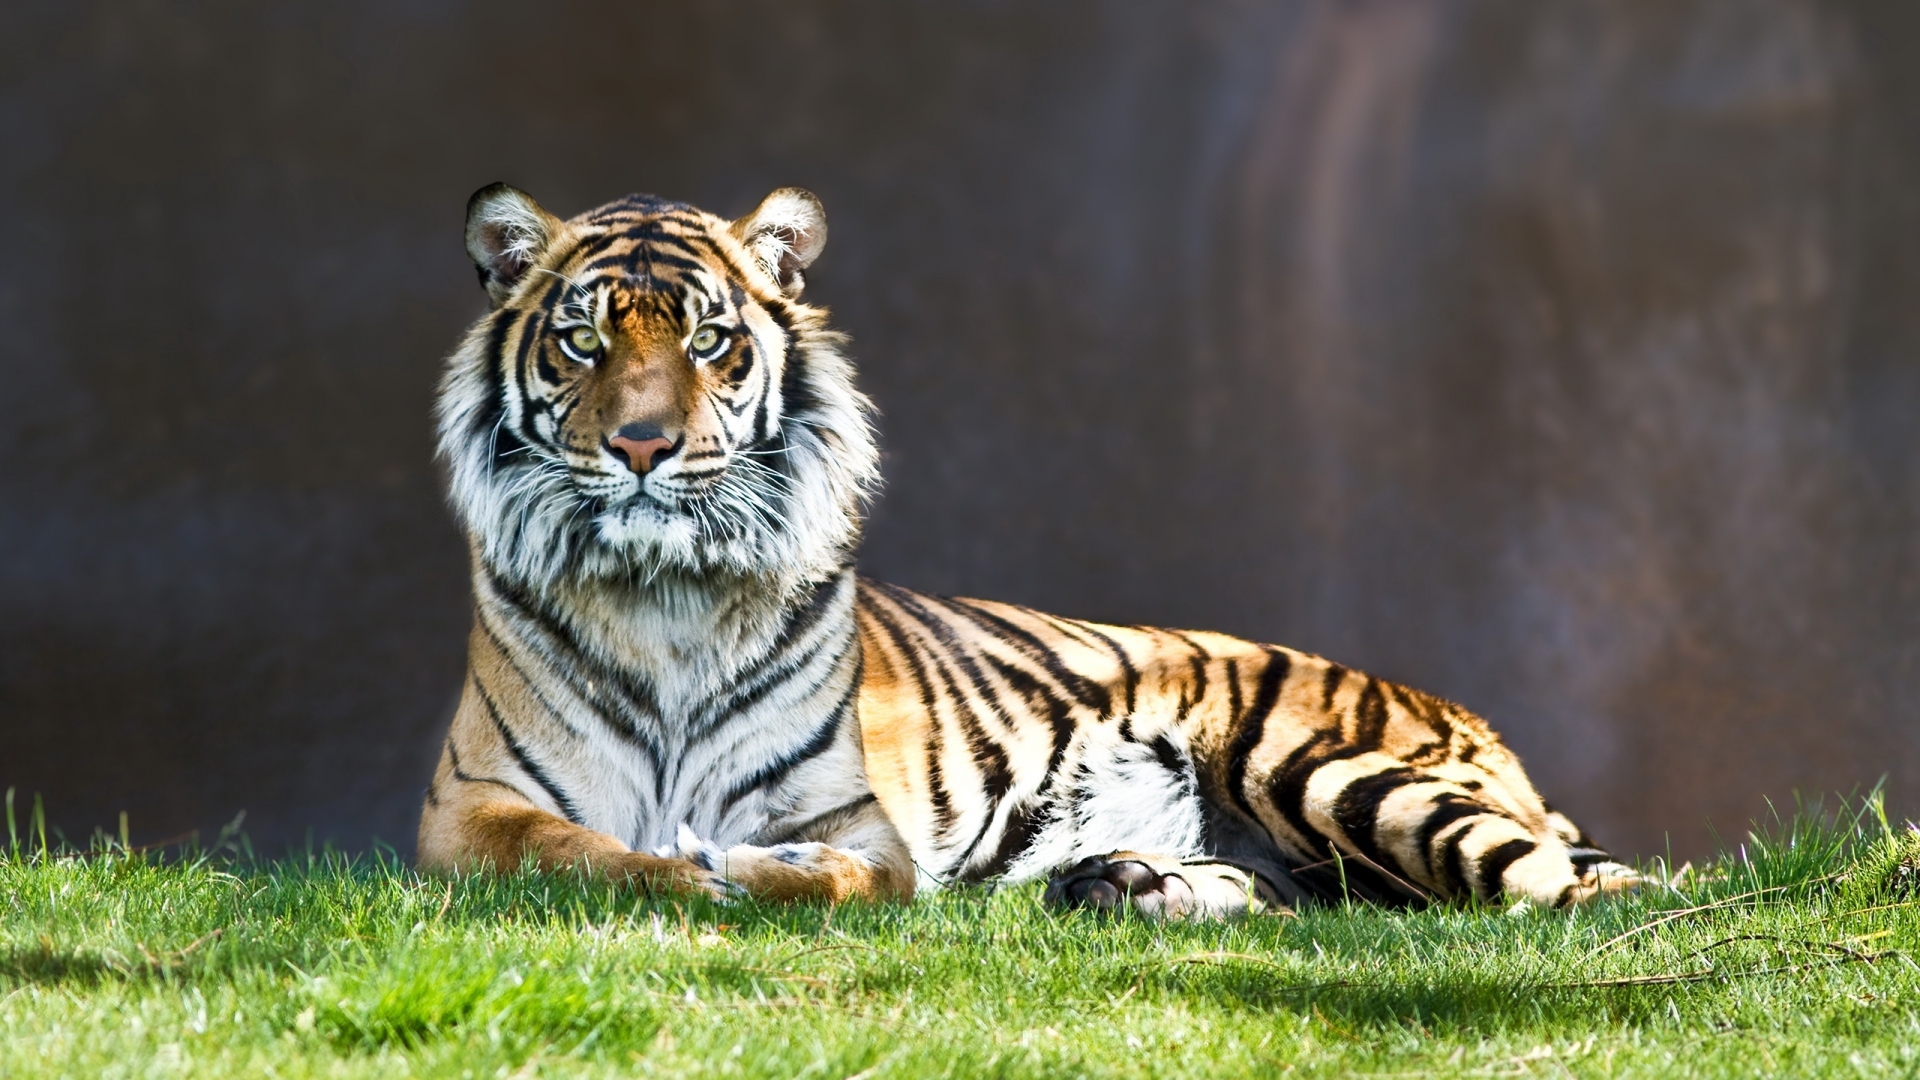 Tiger Thinking for 1920 x 1080 HDTV 1080p resolution